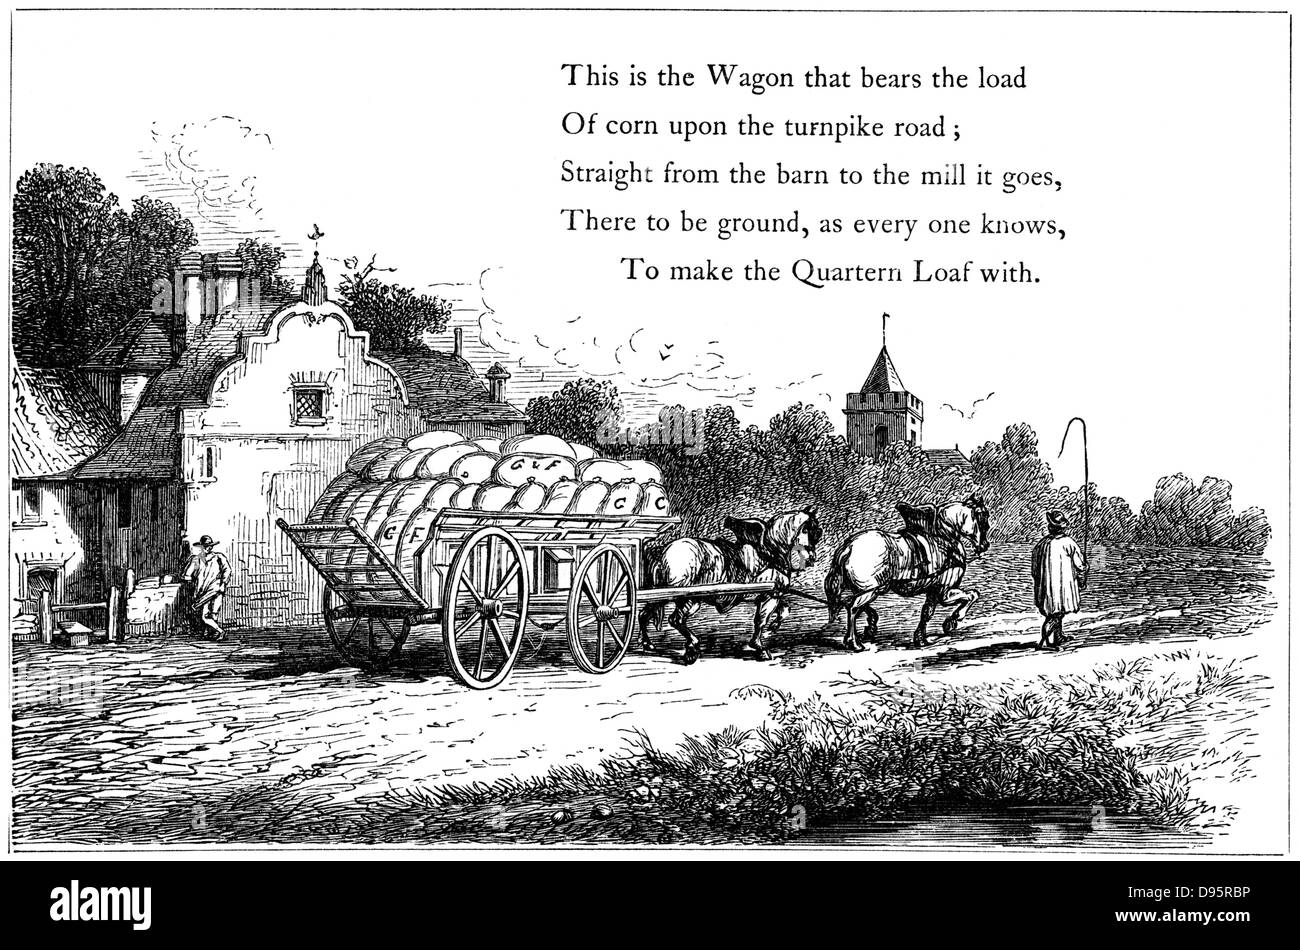 Wagon loaded with sacks of corn on the road to the flour mill.  Carter walks in front of his team of two carthorses with his whip held aloft.  Illustration from children's book, London 1860. Wood engraving. Stock Photo